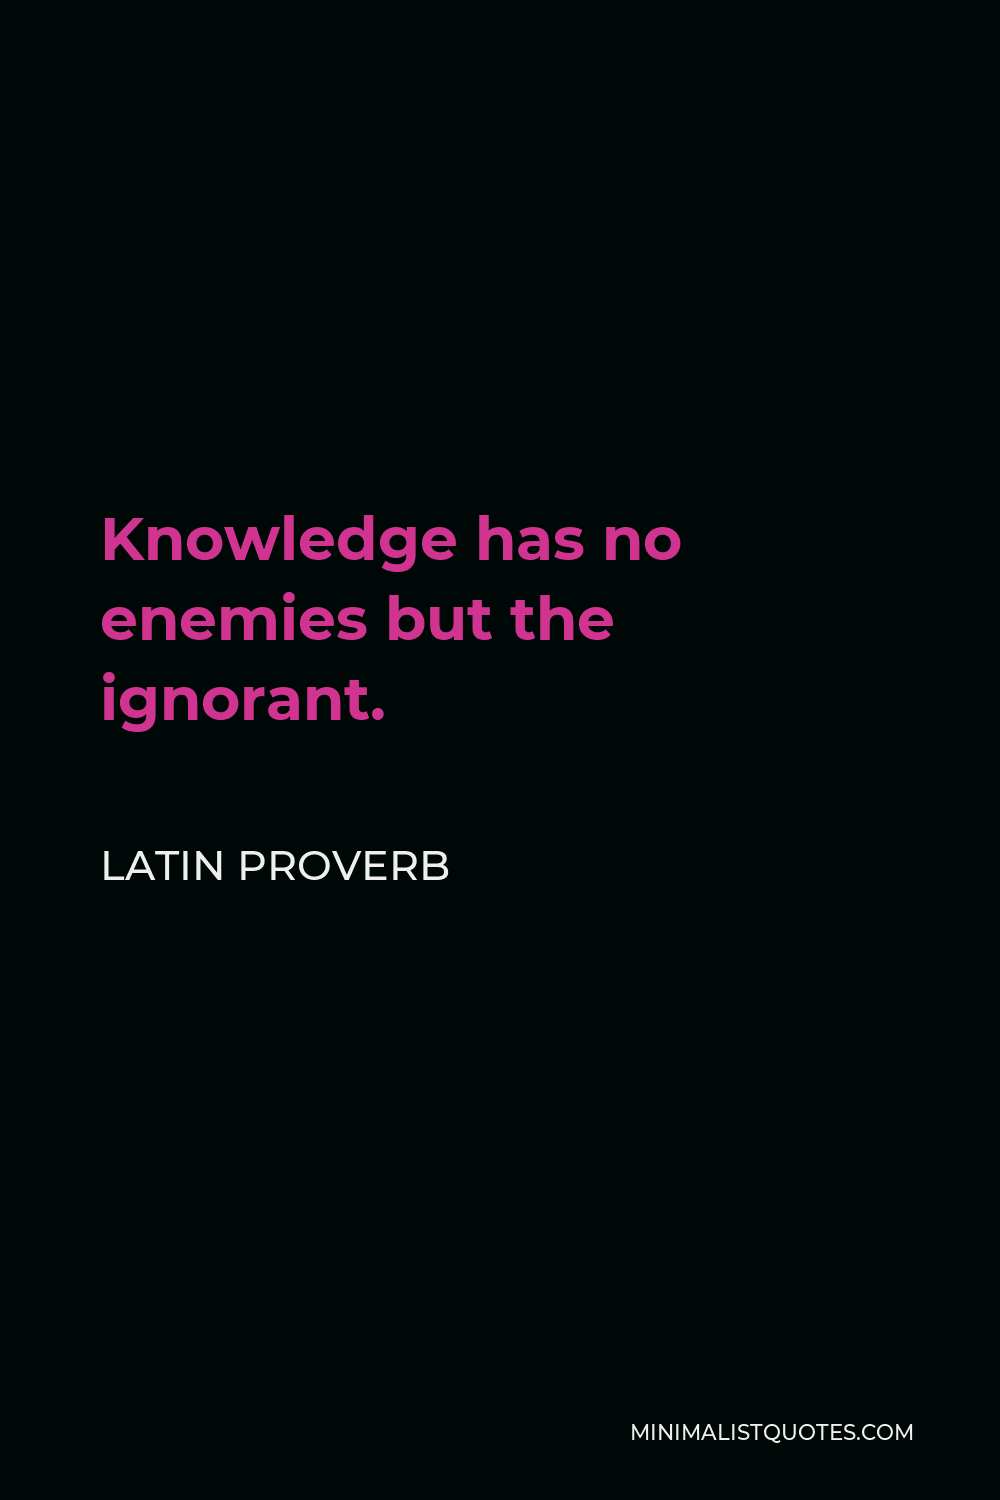 Latin Proverb Quote - Knowledge has no enemies but the ignorant.